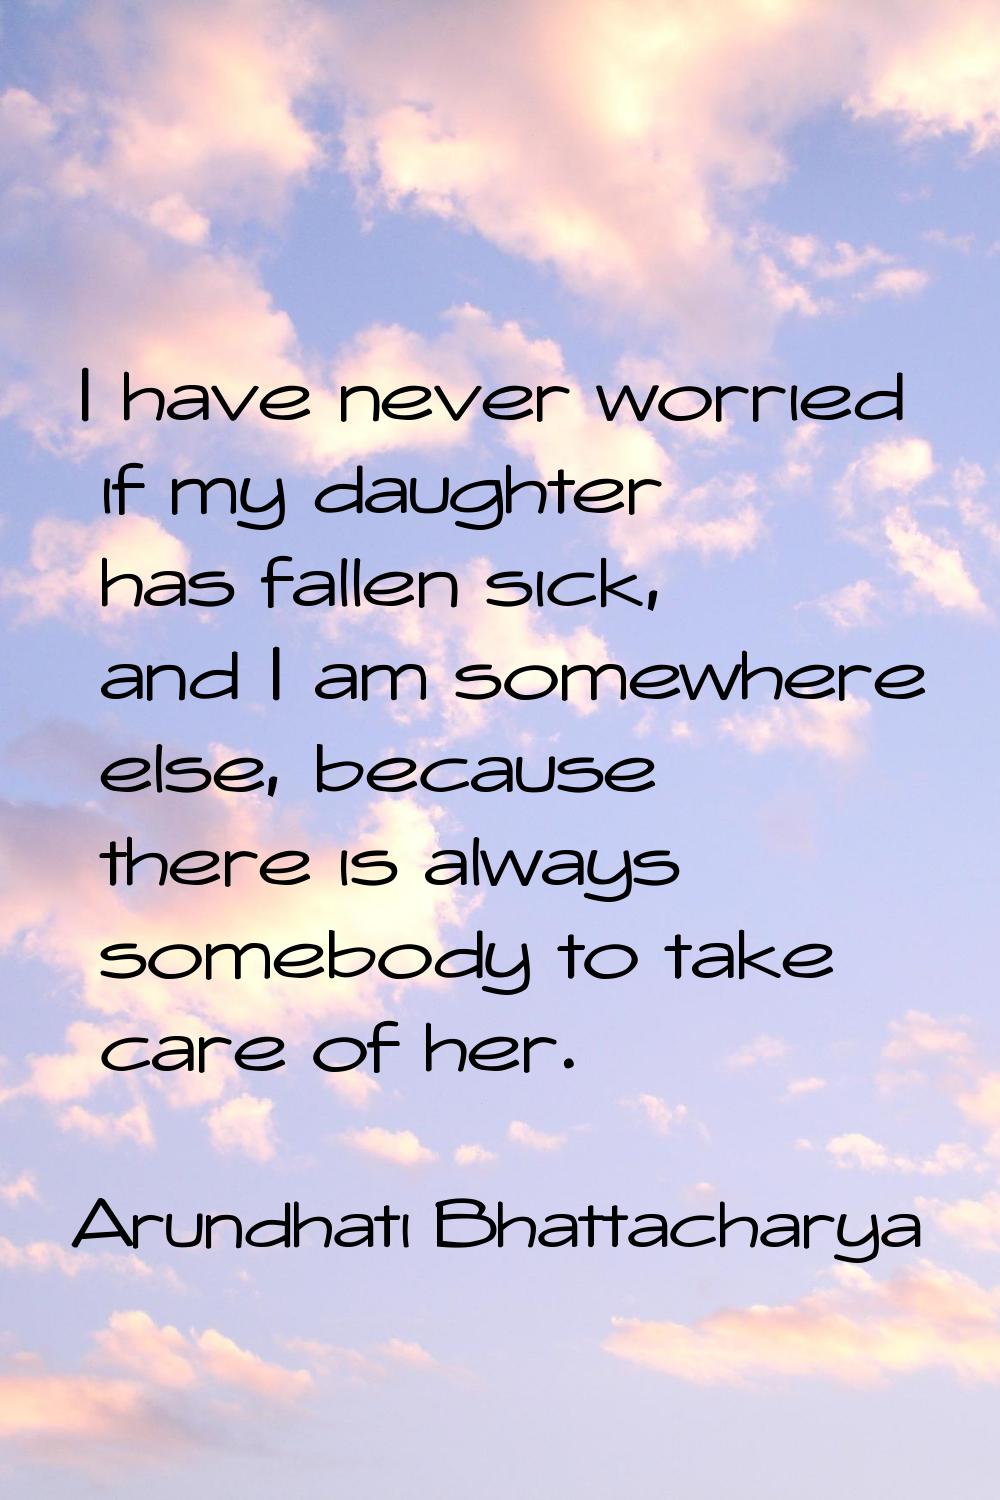 I have never worried if my daughter has fallen sick, and I am somewhere else, because there is alwa